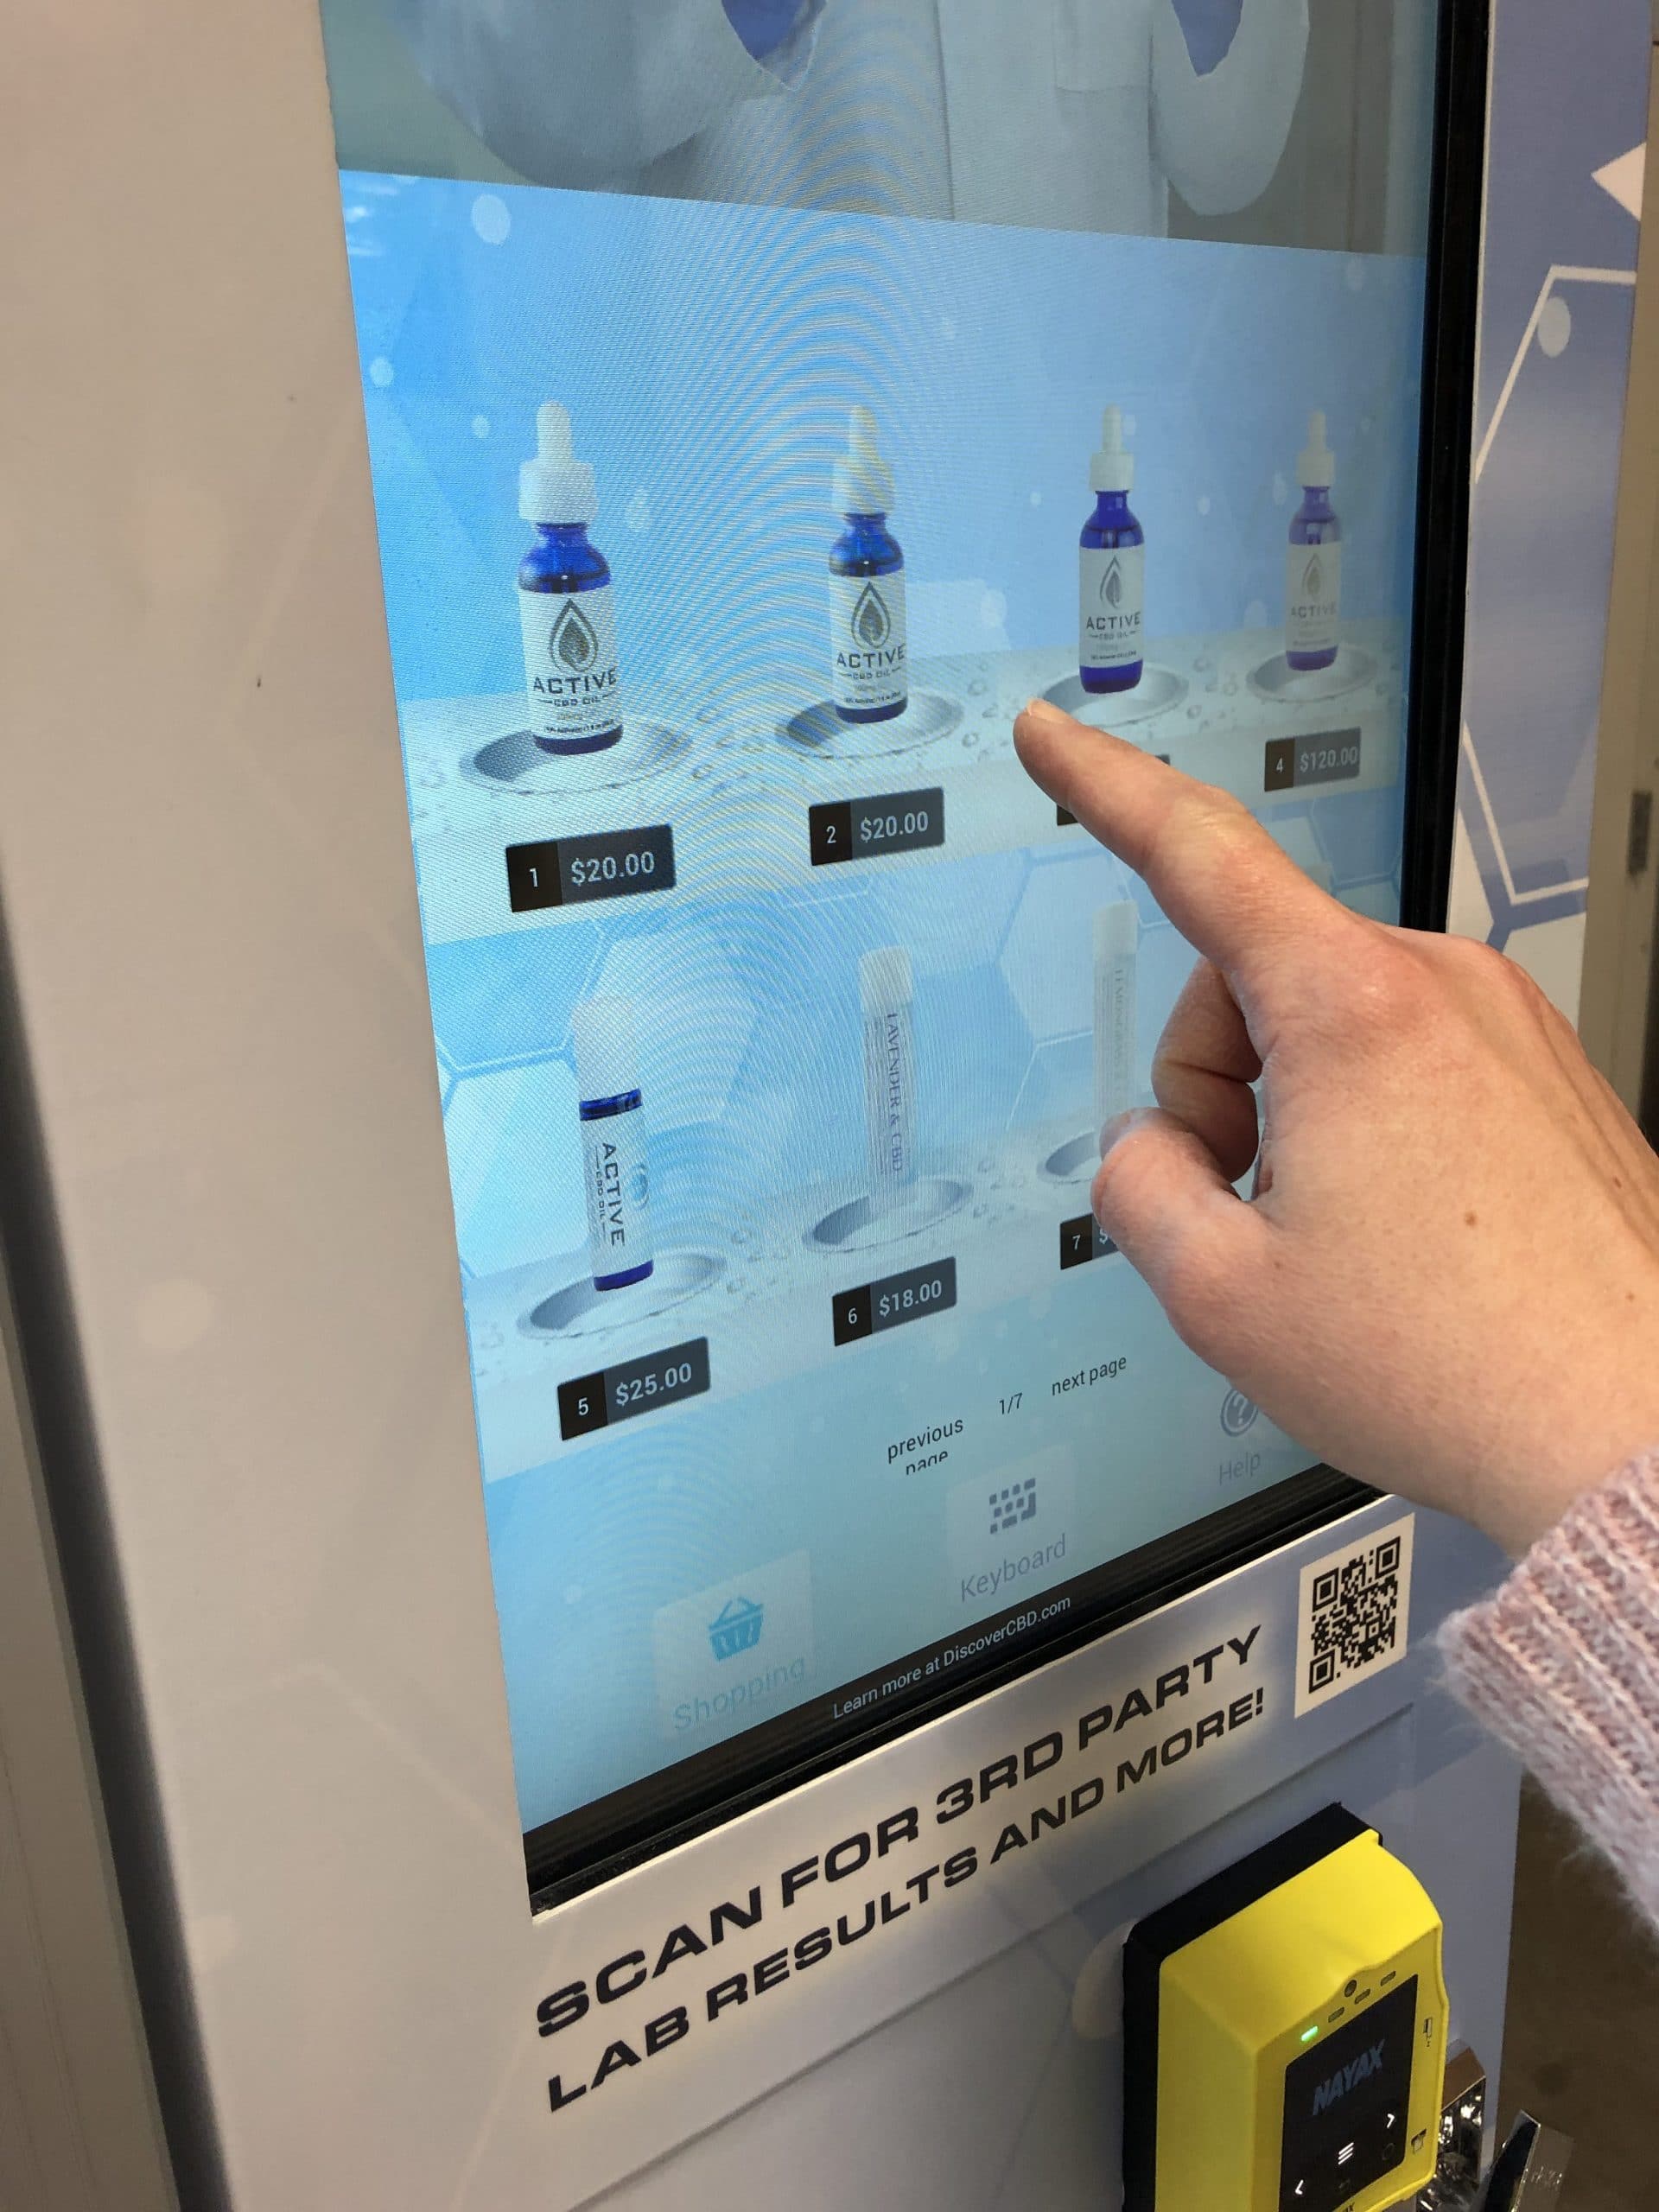 Touchscreen Technology Coming to Vending Machines